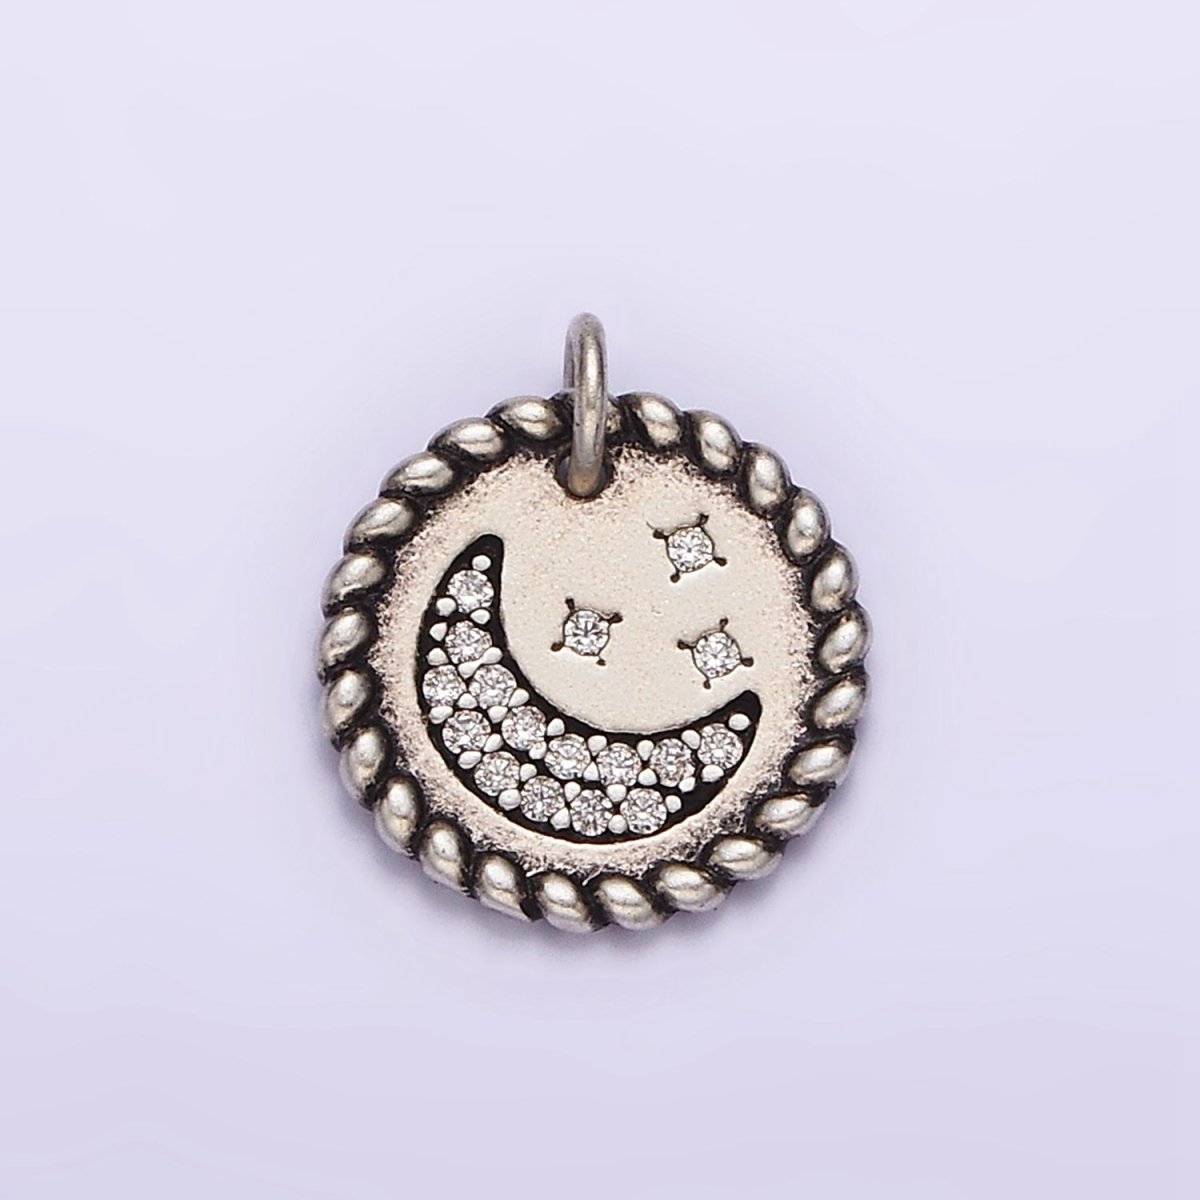 Dainty Moon Star Charm in 925 Sterling Silver Pendant Micro Pave Celestial Jewelry SL-321 - DLUXCA